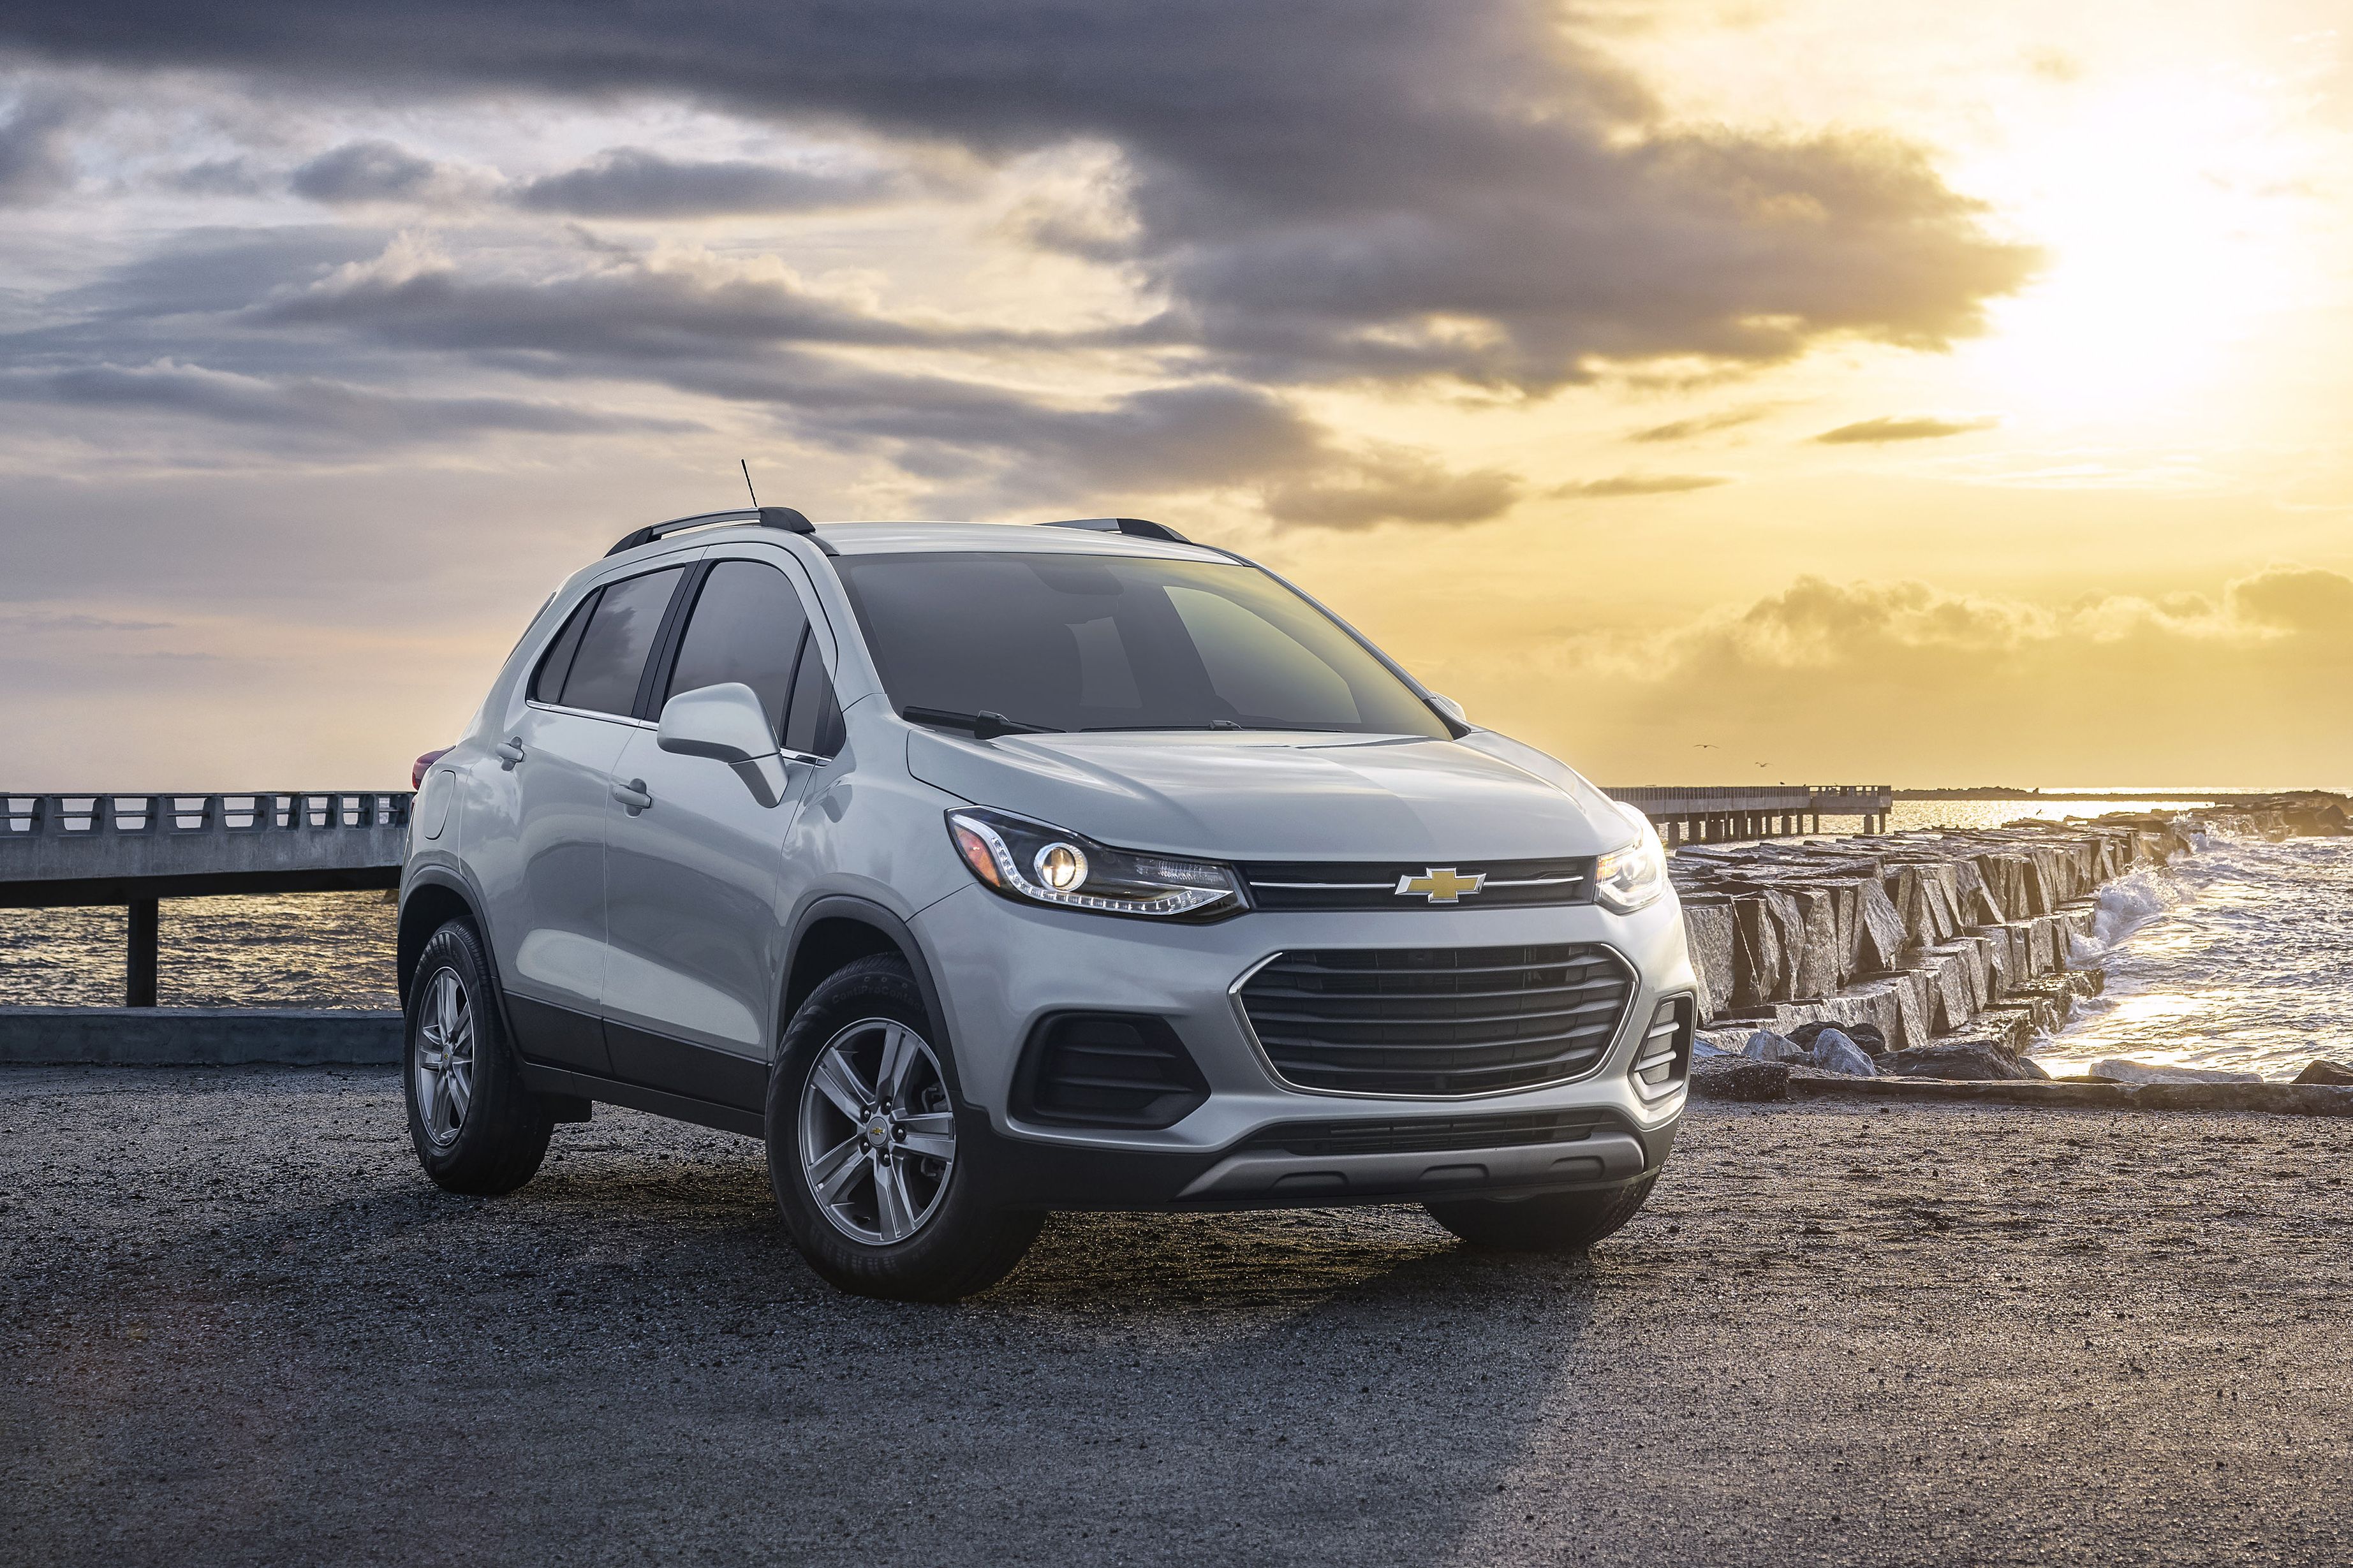 2021 Chevy Trax Interior  Dimensions  Features  Hillside Chevrolet Buick  GMC  Charlottetown